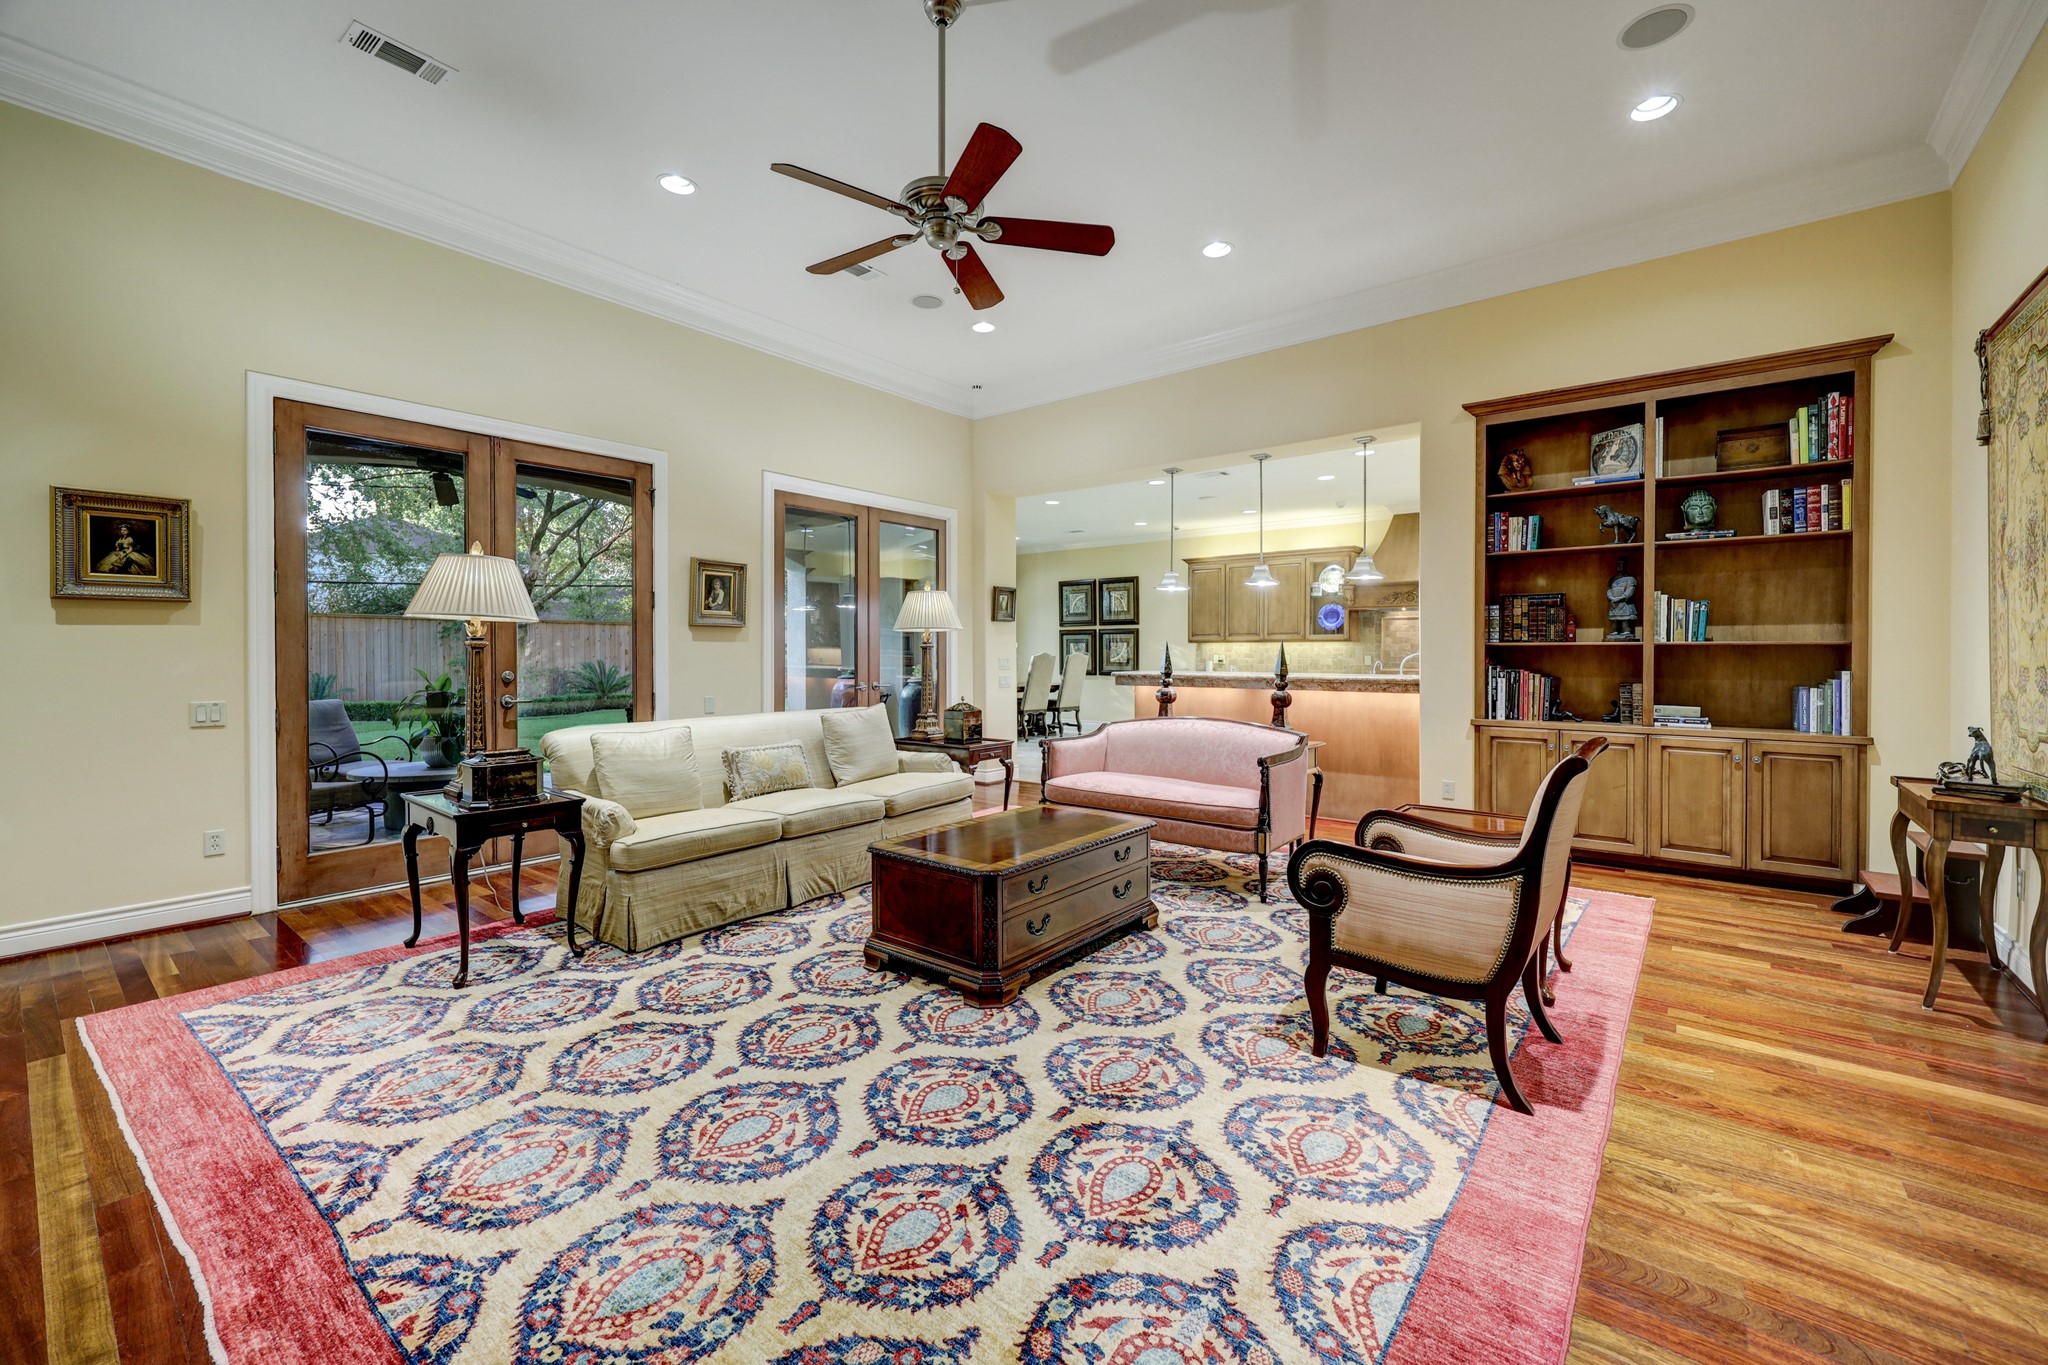 The Family Room [25 x 20] features hardwood floors, crown molding and baseboards, ceiling speakers, two walls of built-ins, gas fireplace with tile surround and wood mantle, and access to the covered patio/summer kitchen.